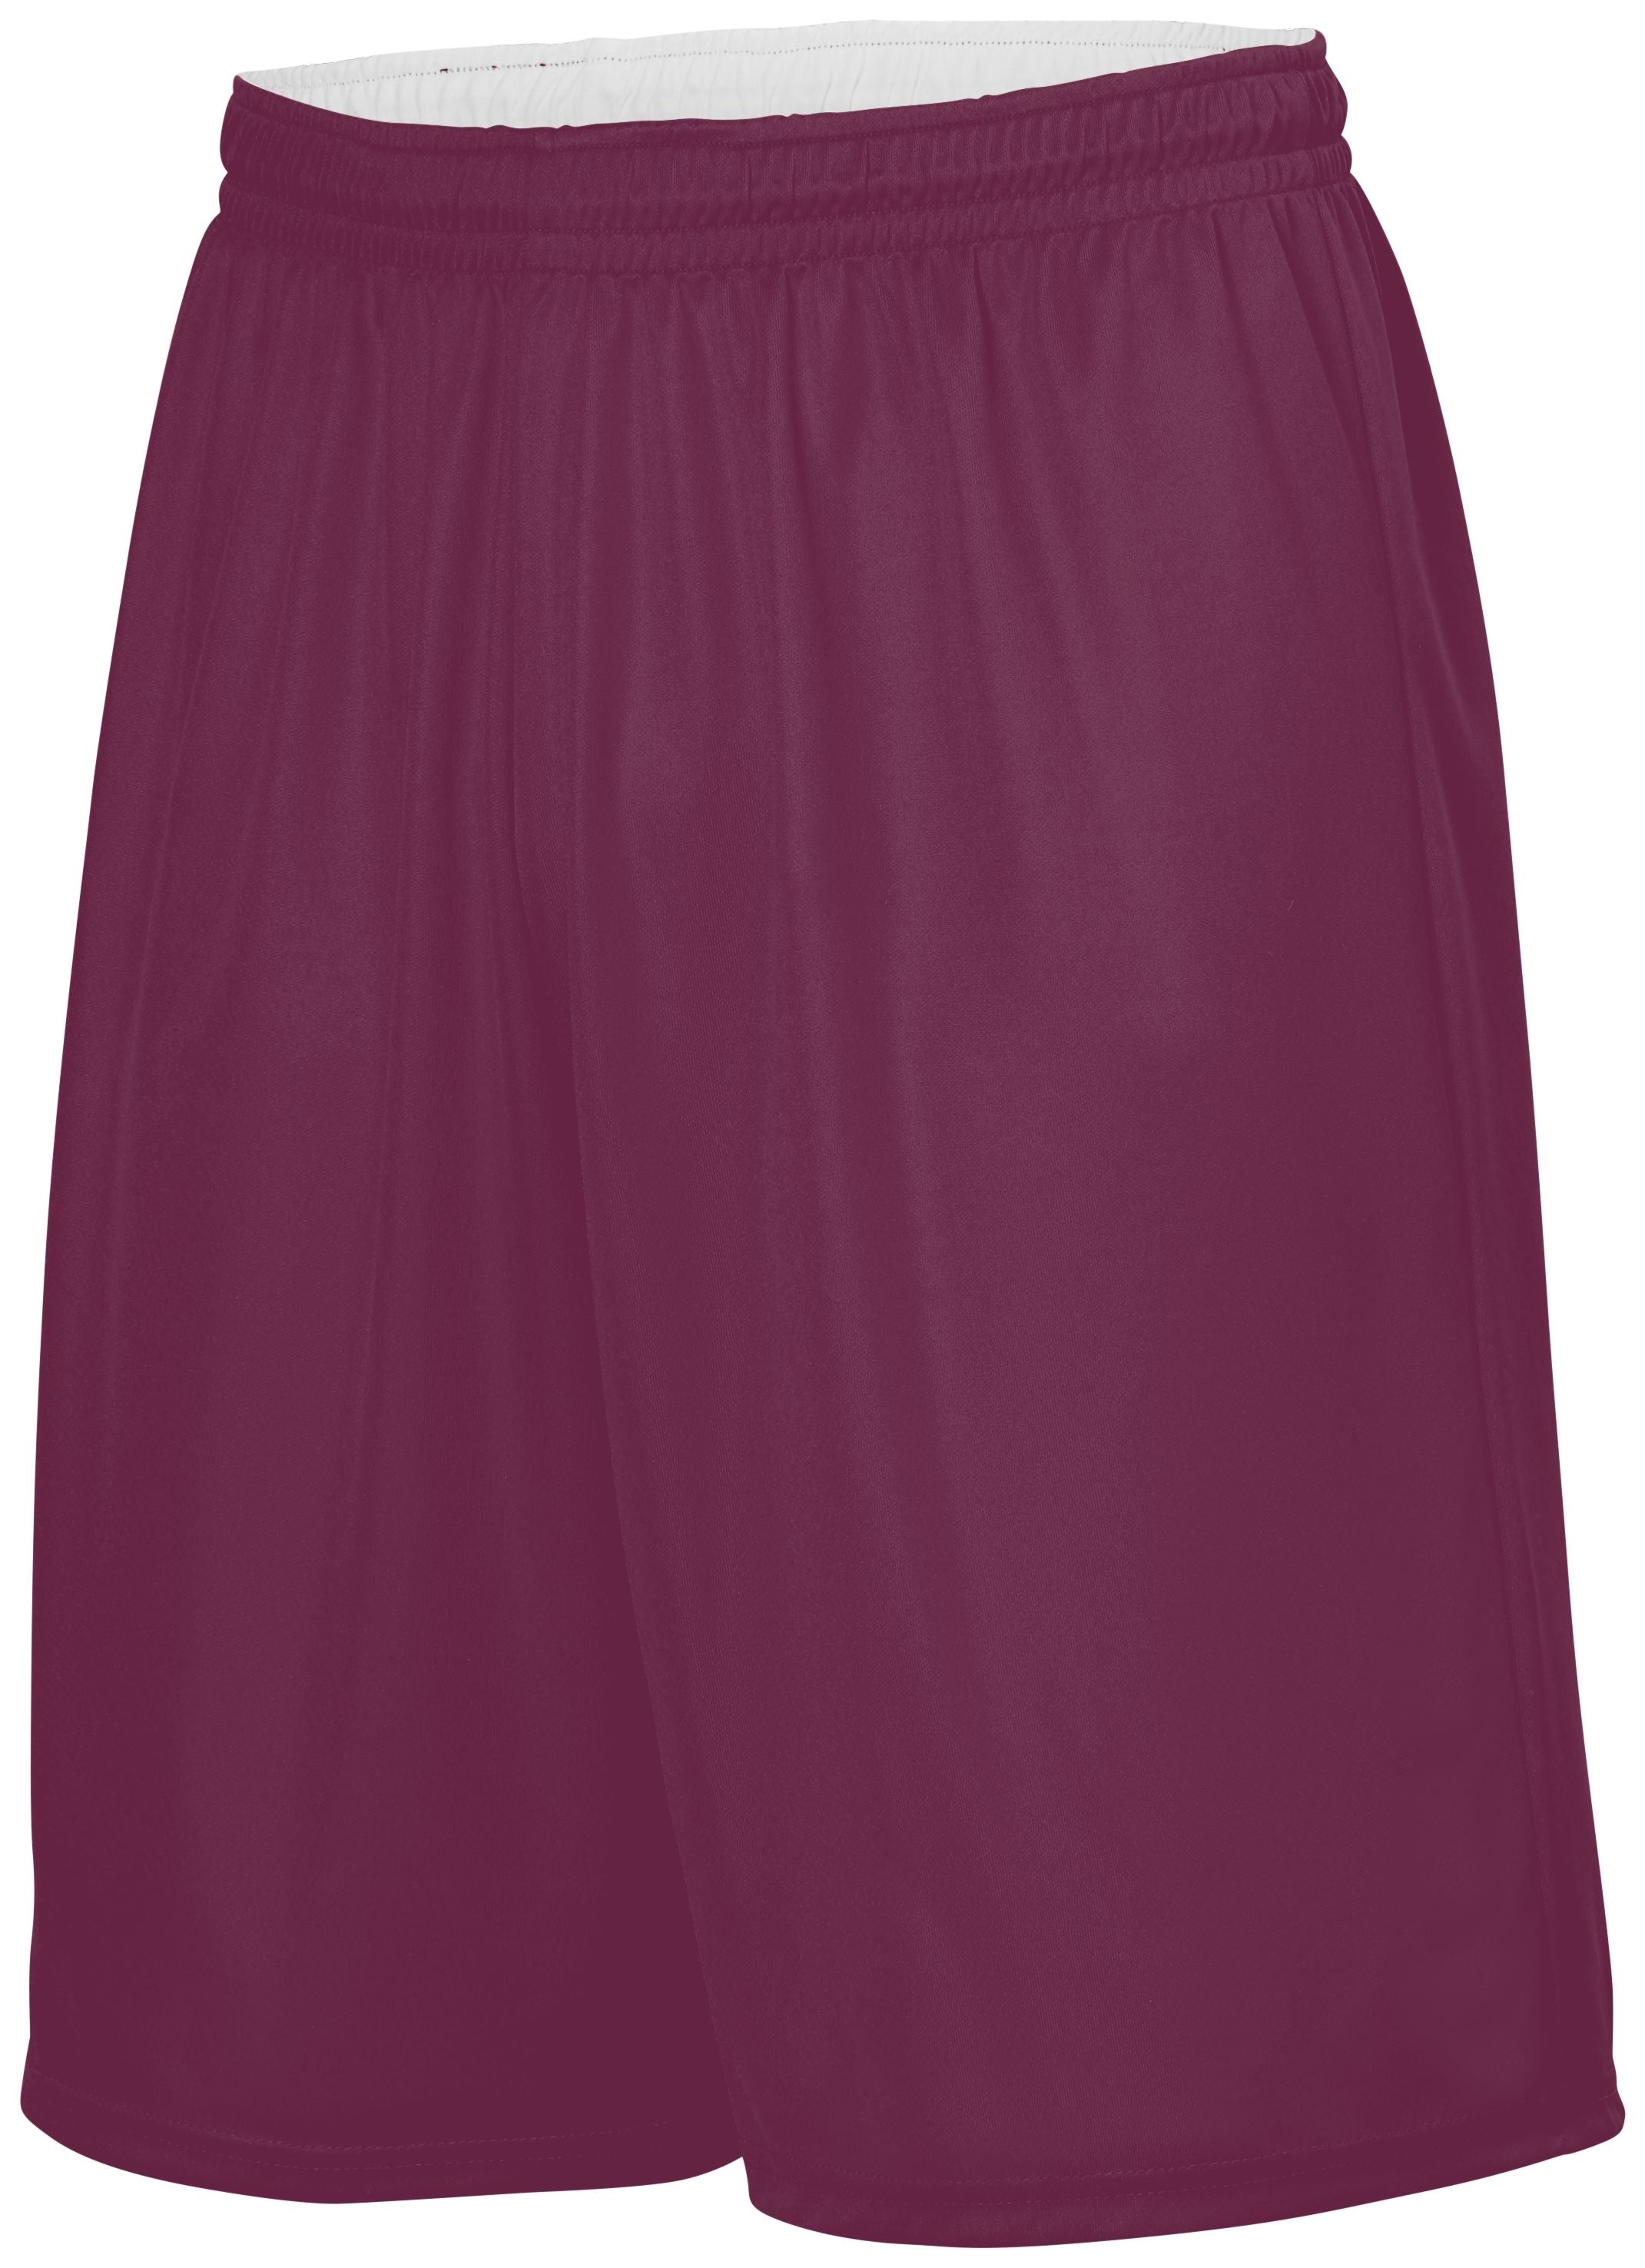 Augusta Sportswear Reversible Wicking Shorts in Light Maroon/White  -Part of the Adult, Adult-Shorts, Augusta-Products, Basketball, All-Sports, All-Sports-1 product lines at KanaleyCreations.com